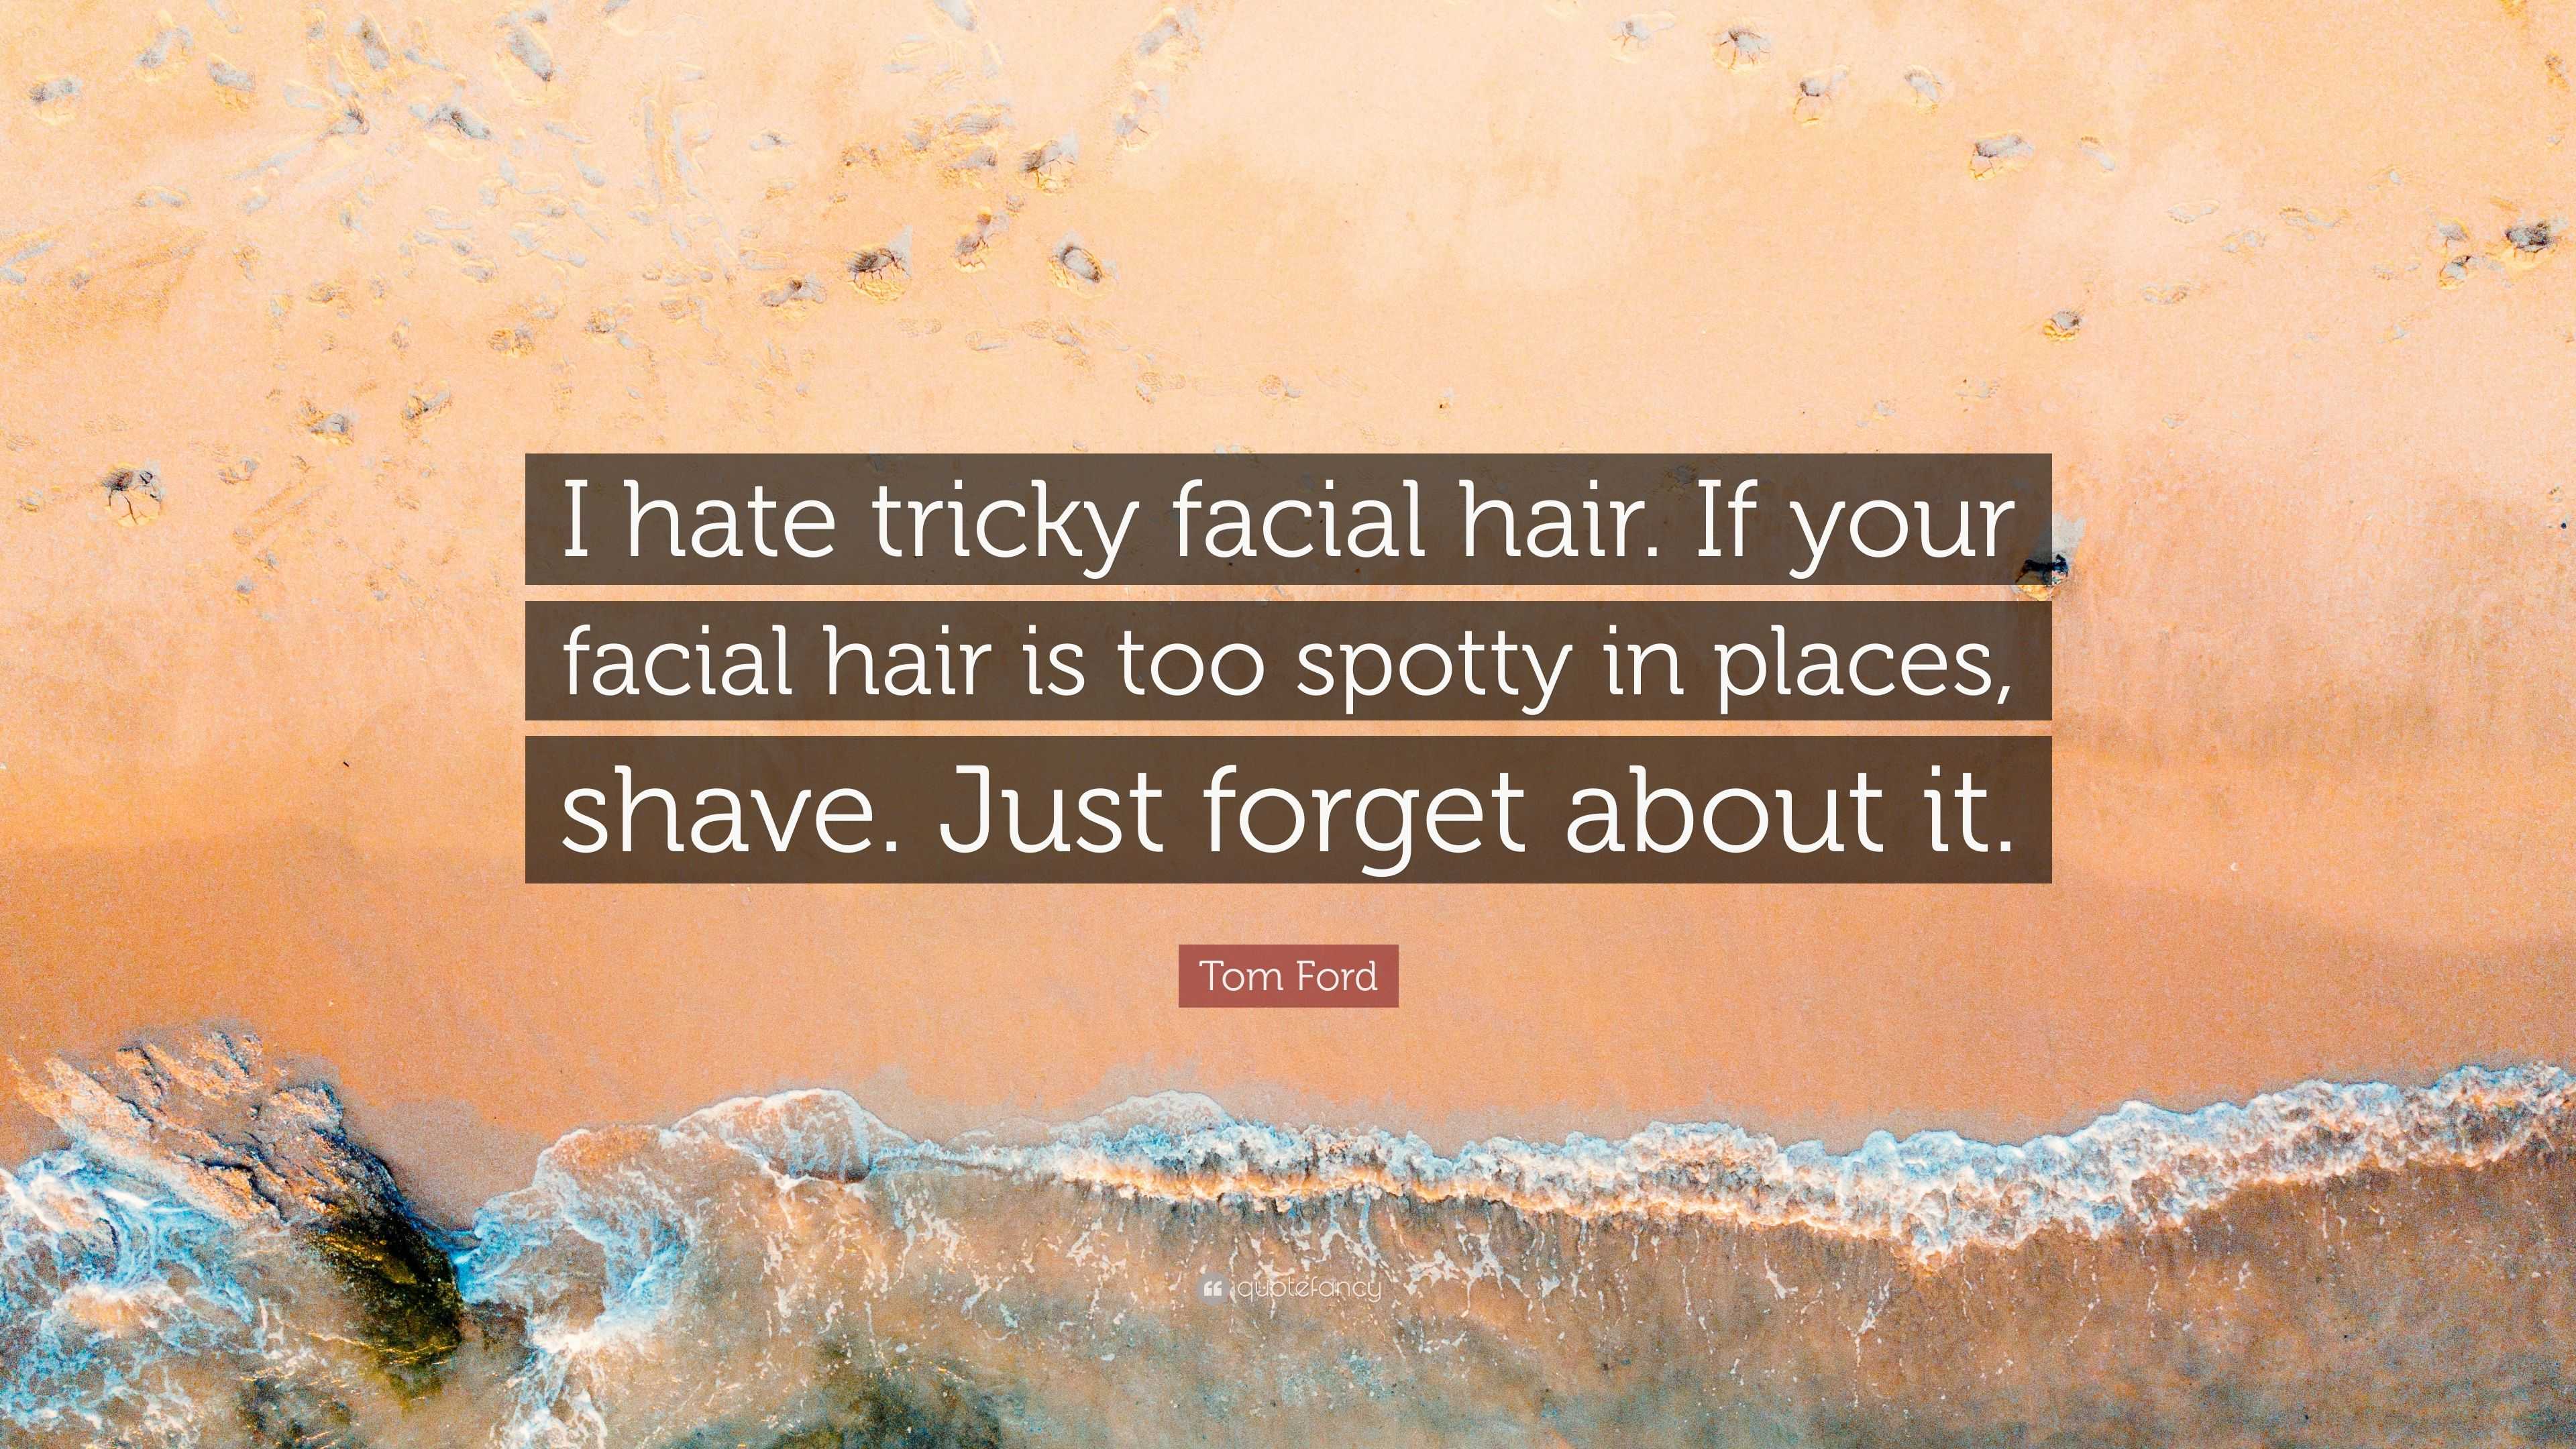 Tom Ford Quote: “I hate tricky facial hair. If your facial hair is too  spotty in